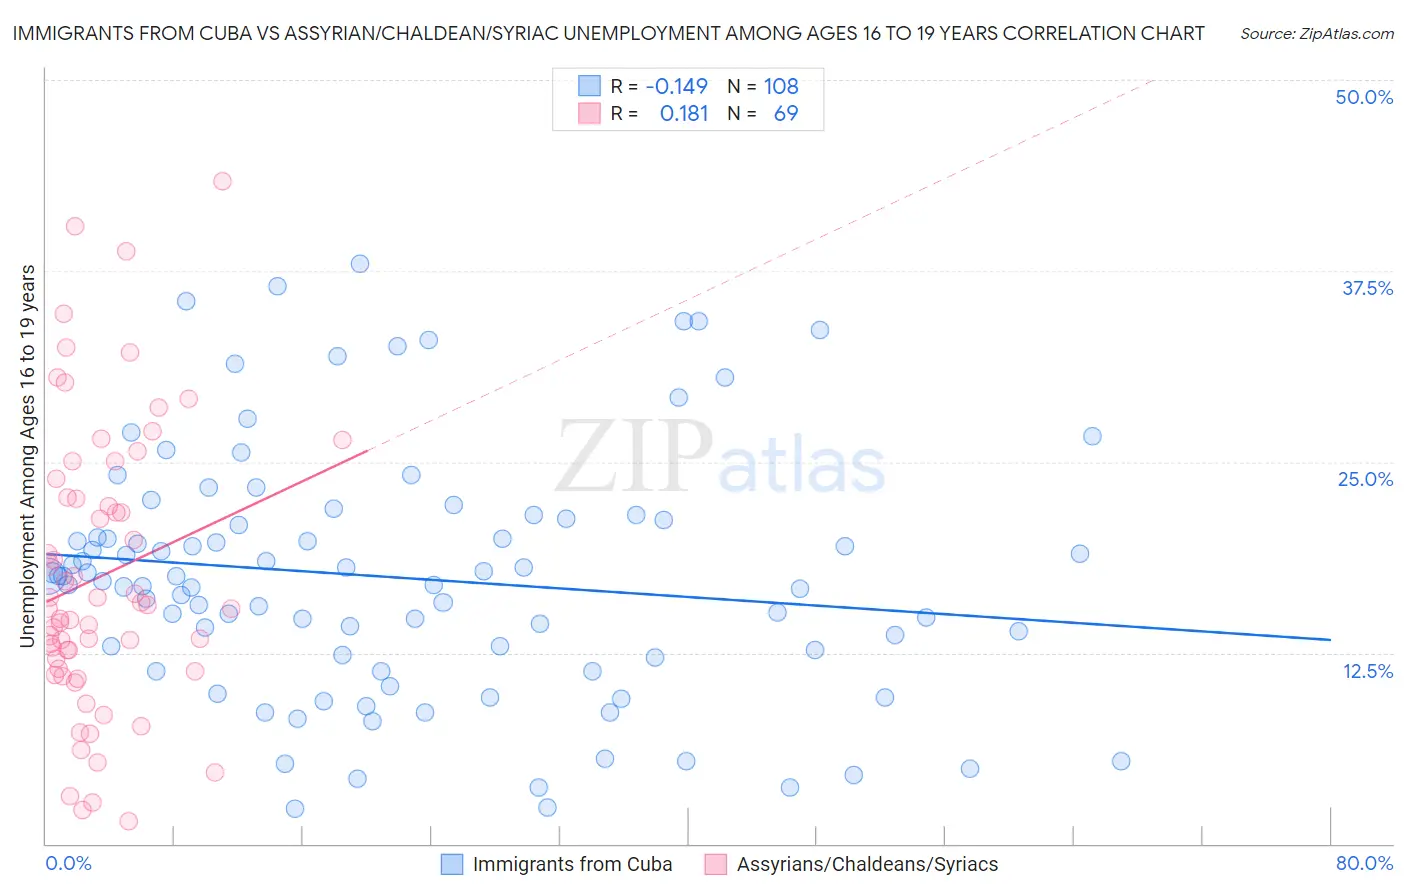 Immigrants from Cuba vs Assyrian/Chaldean/Syriac Unemployment Among Ages 16 to 19 years